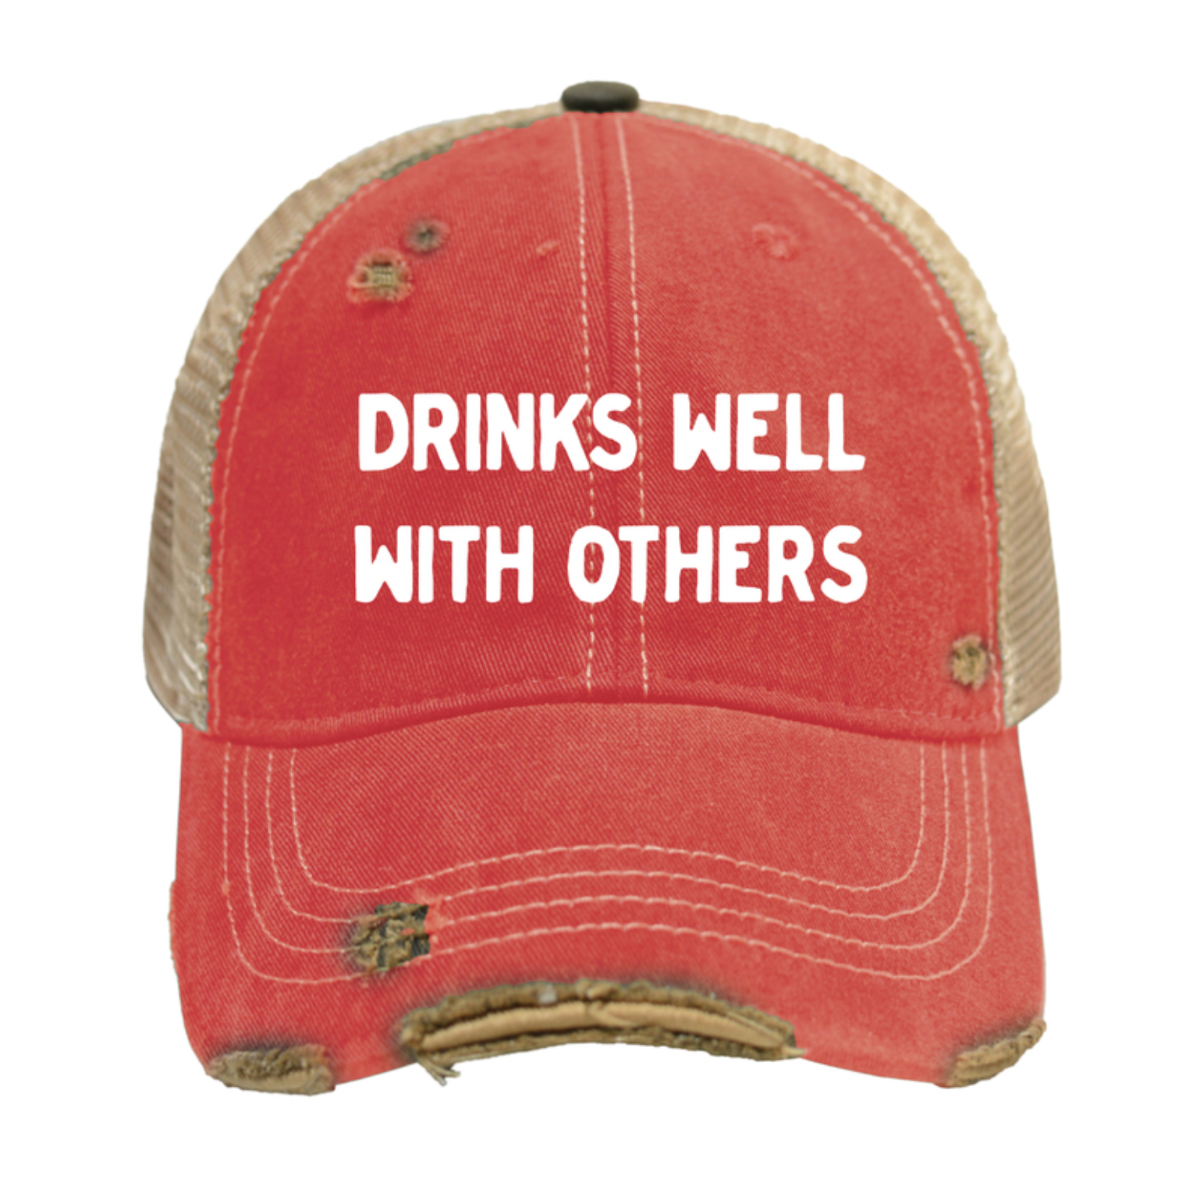 Drinks Well With Others Snap Back Vintage Trucker Cap